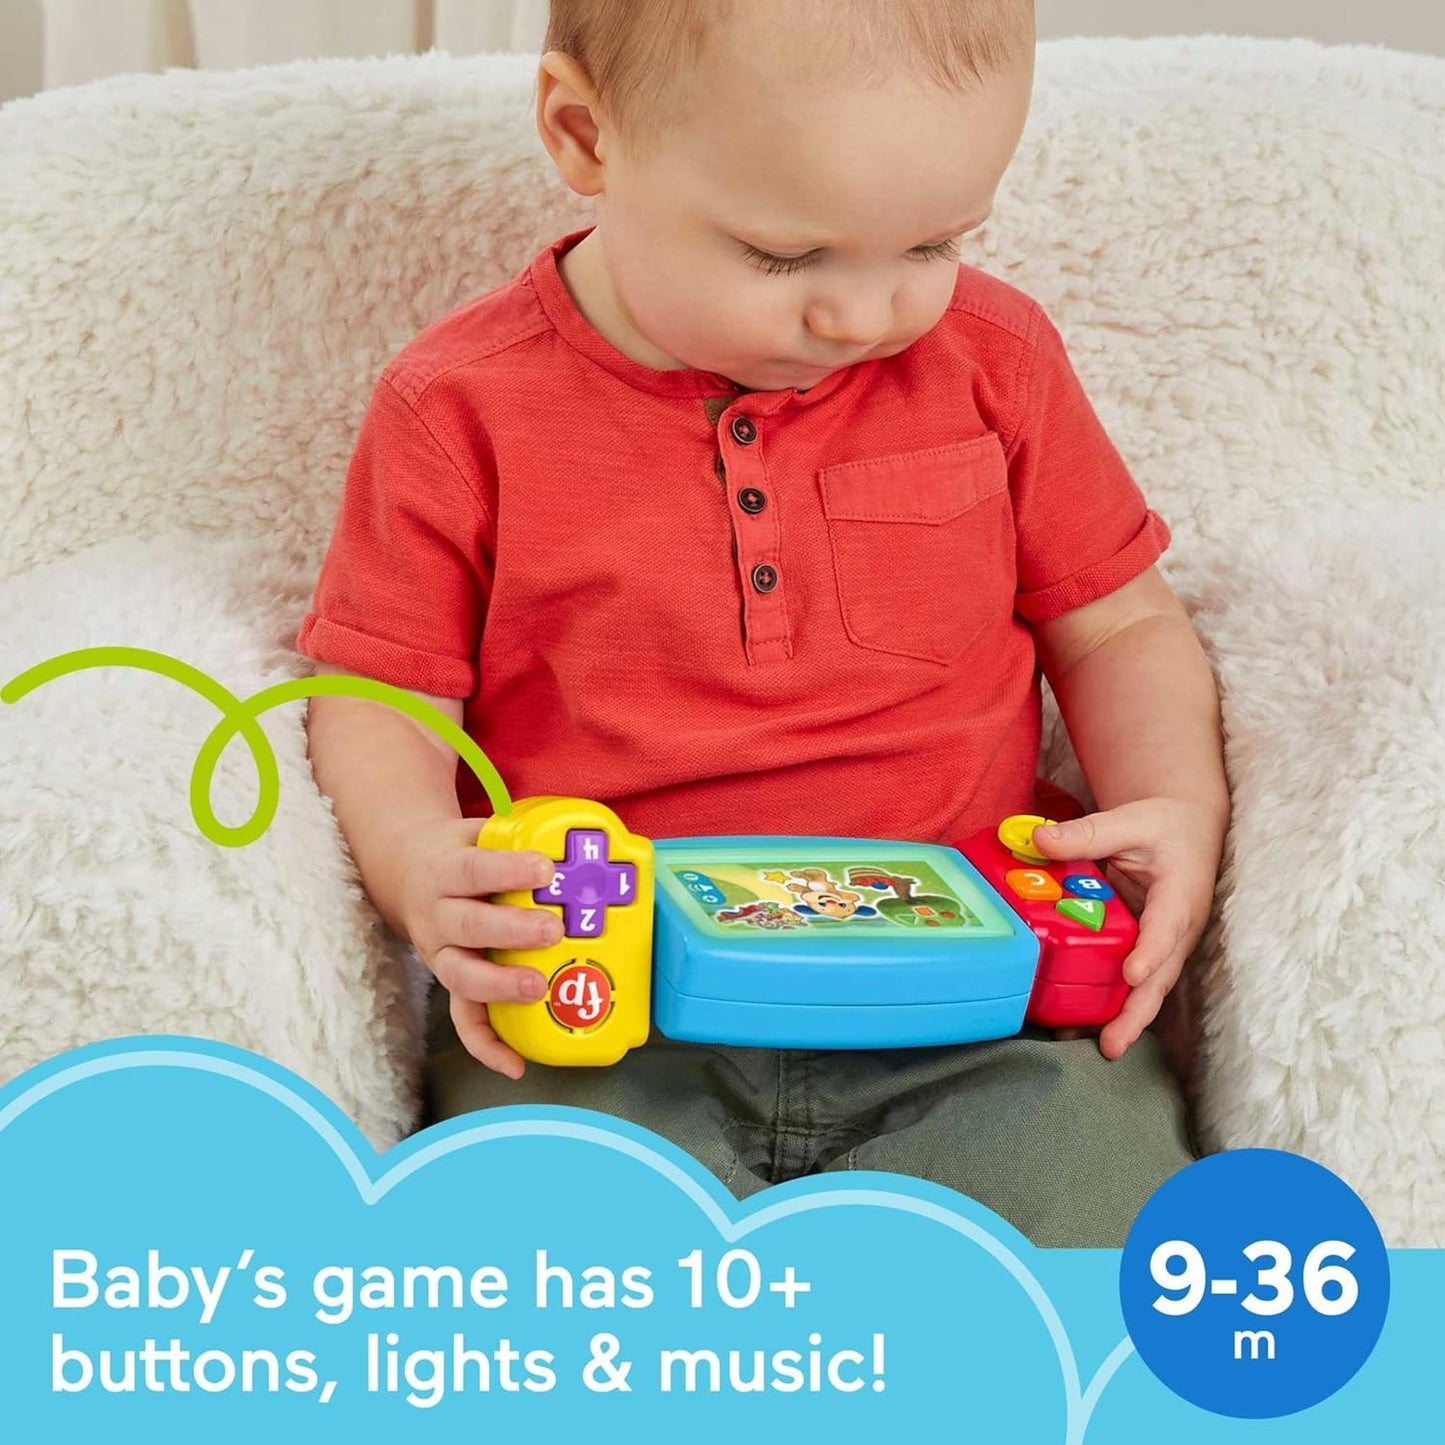 Fisher-Price  Laugh Twist & Learn Gamer Toy